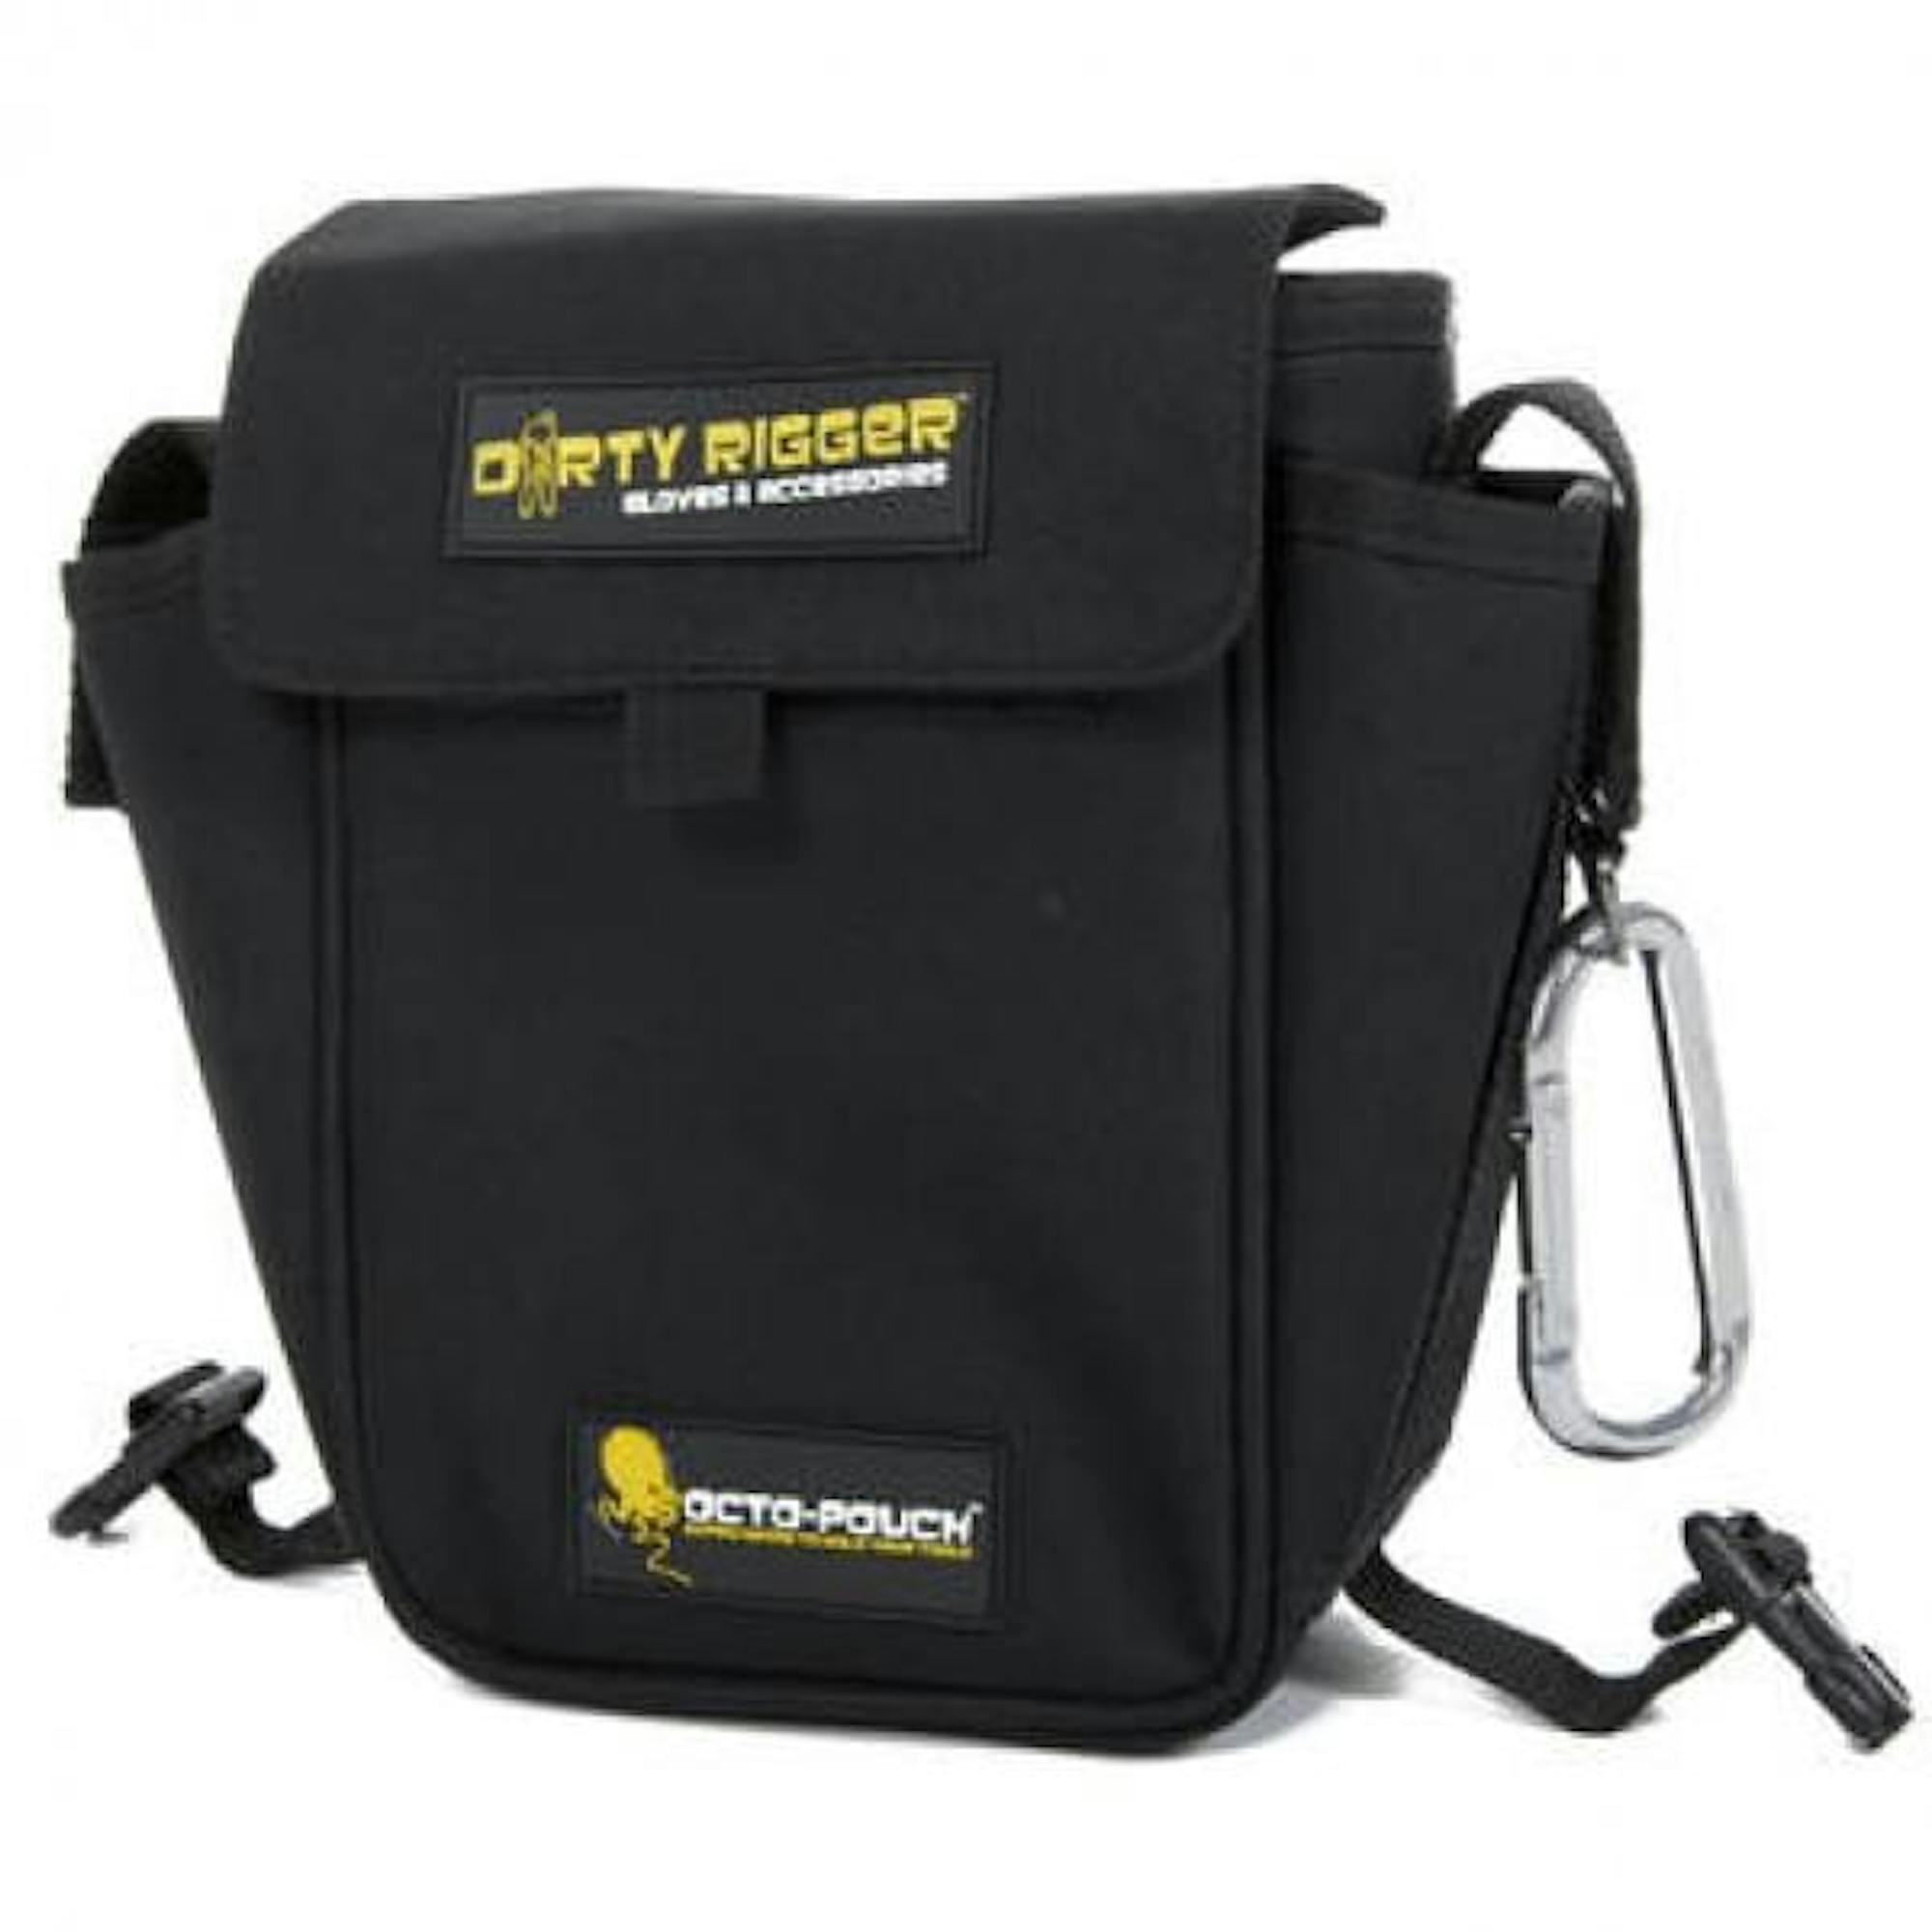 Dirty Rigger Riggers Octo Pouch